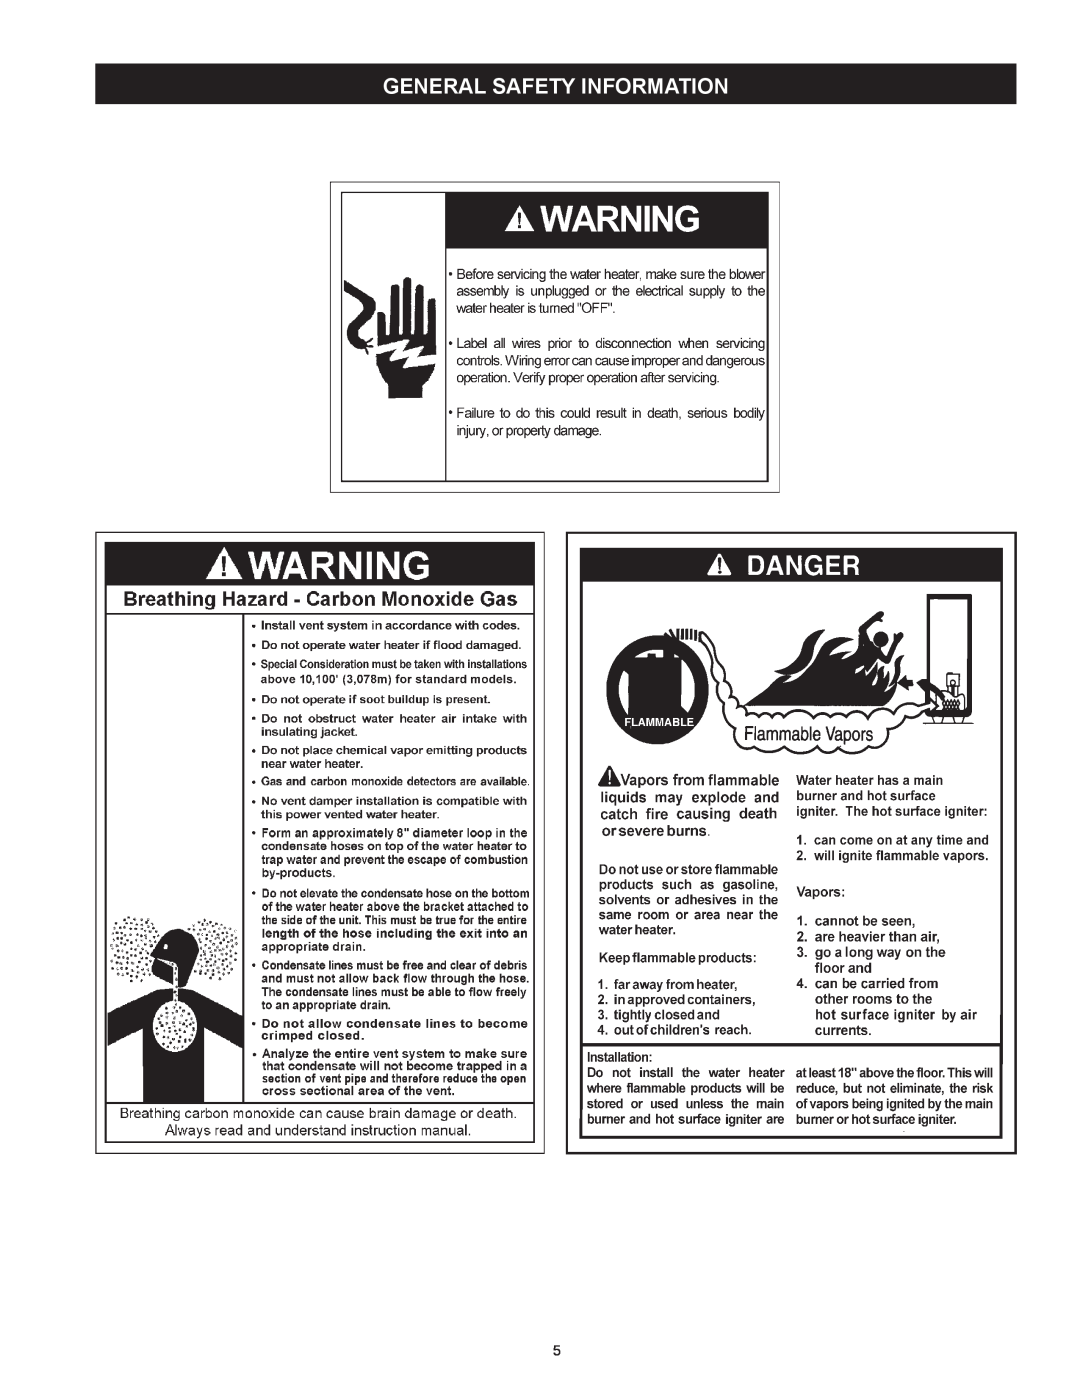 American Water Heater VG6250T100 instruction manual general safety information 